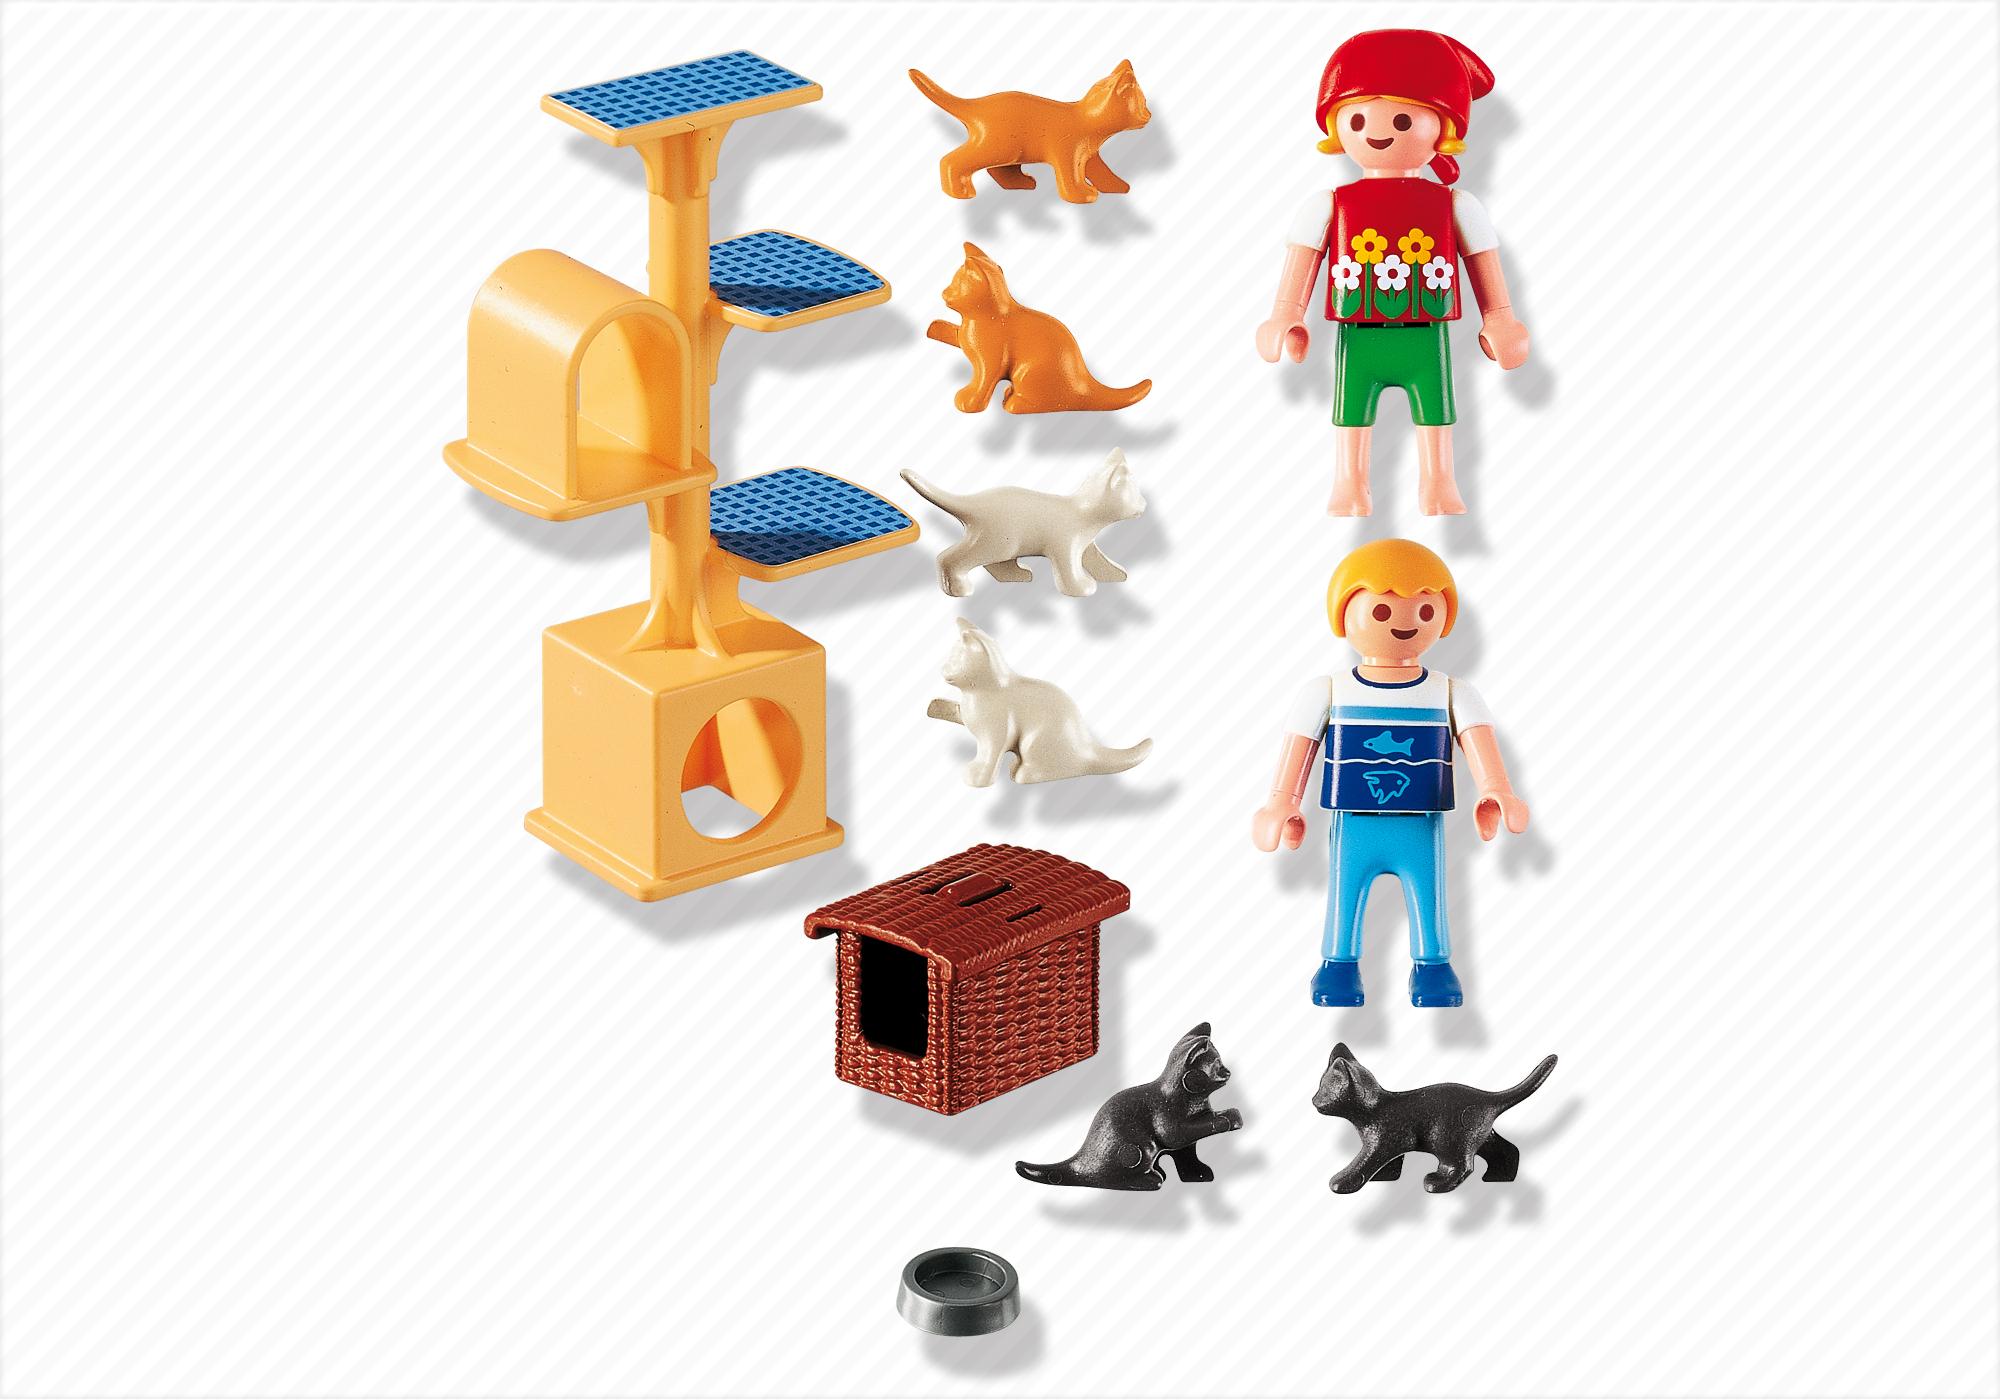 playmobil famille chats